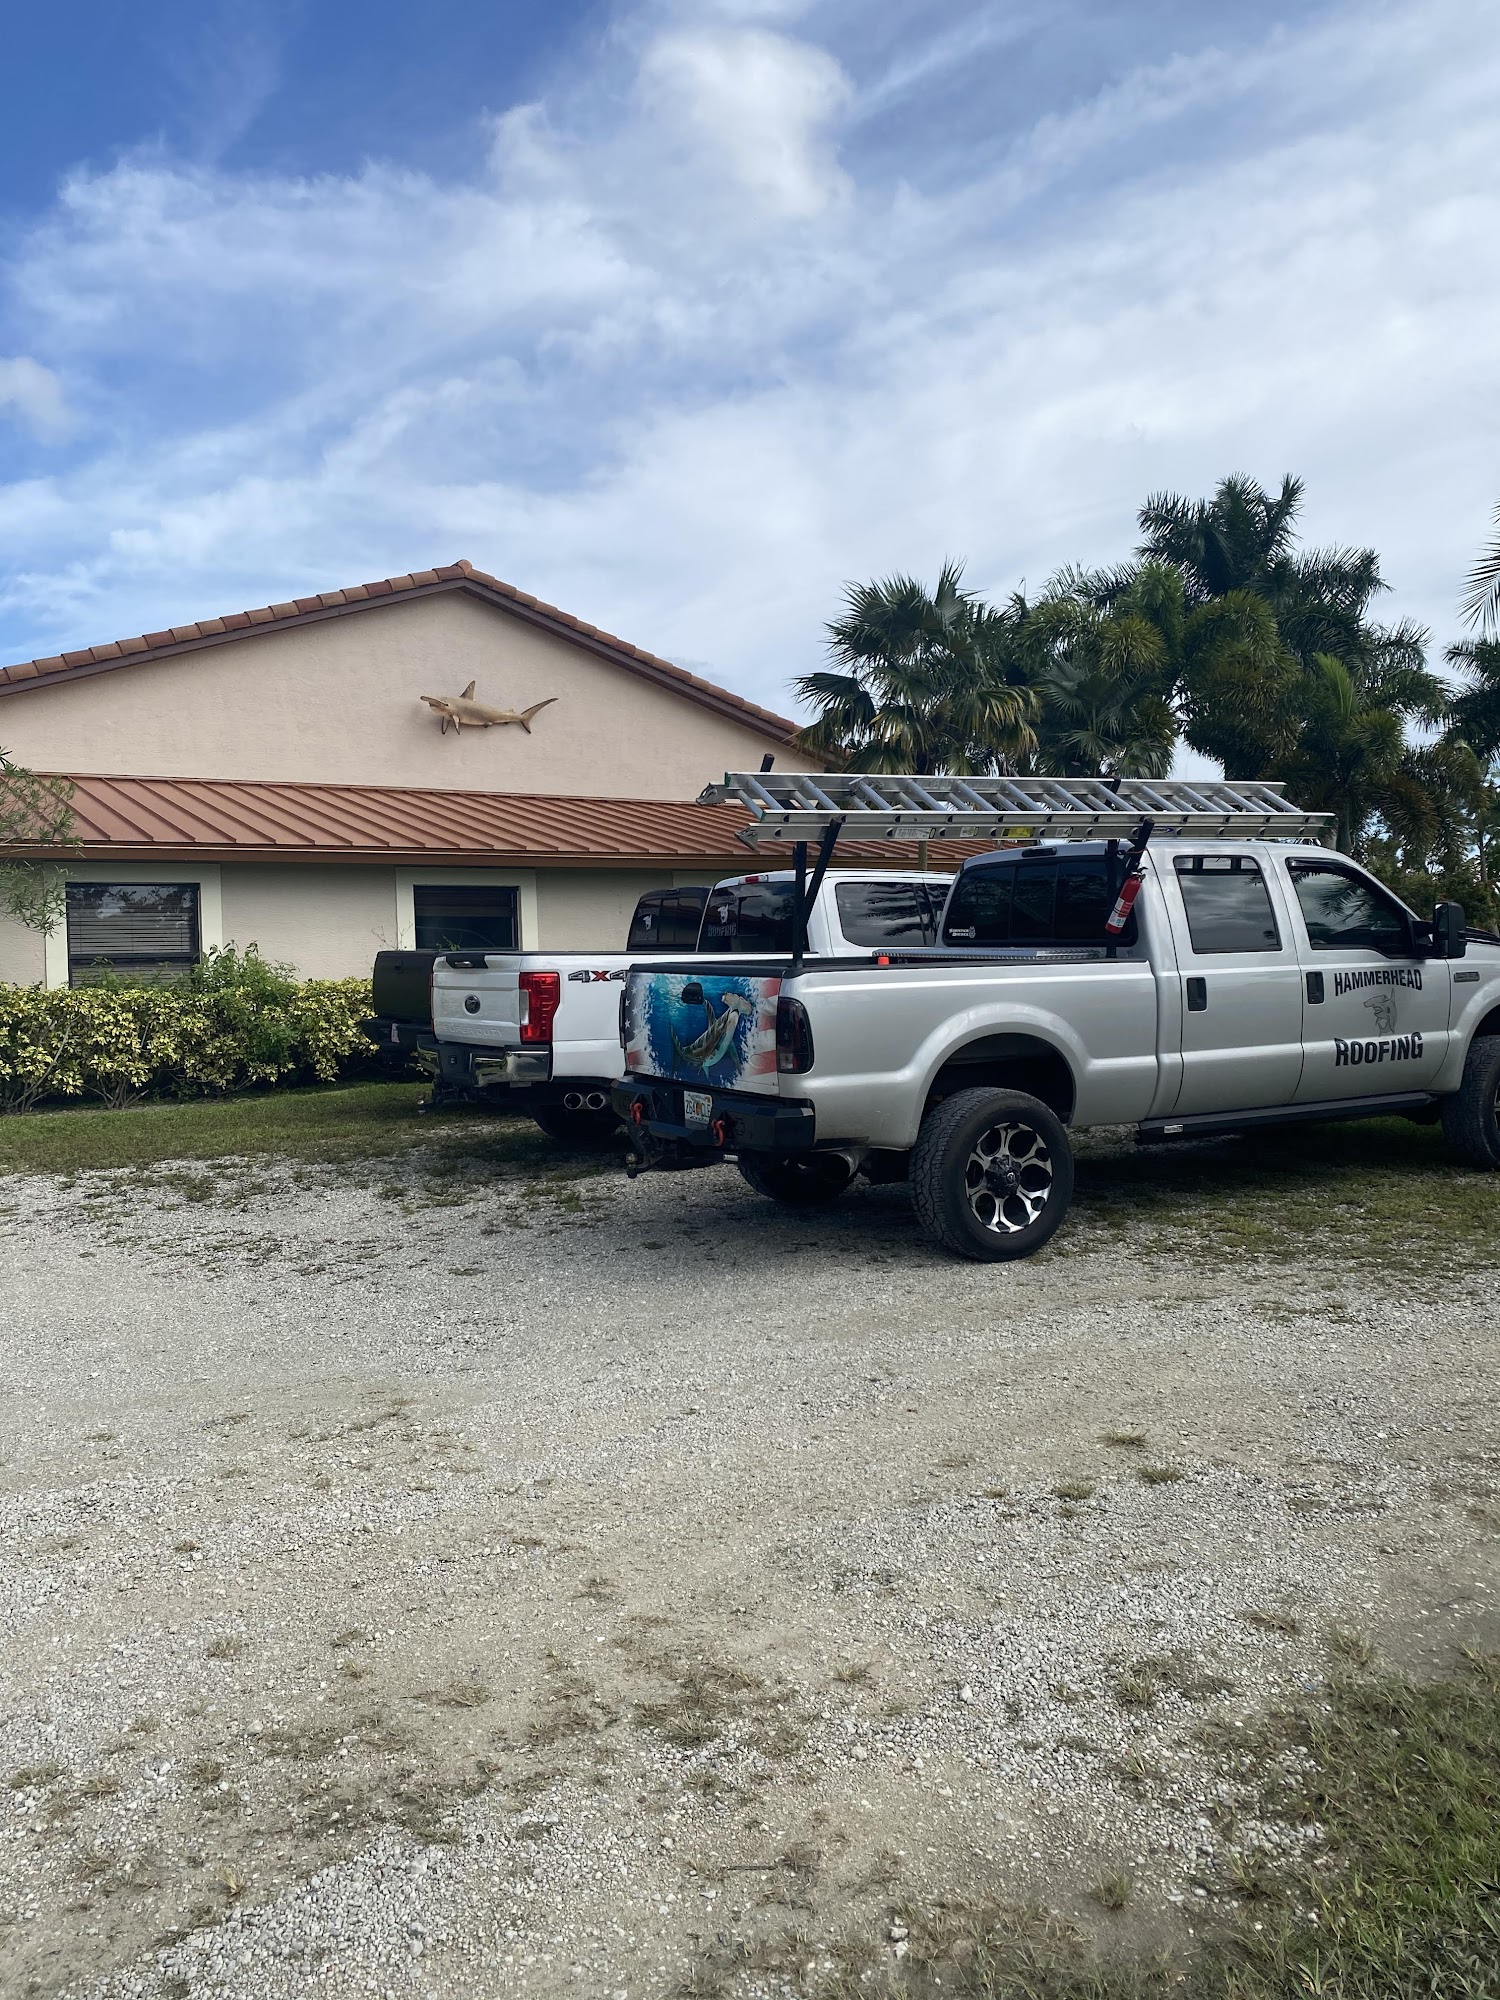 Hammerhead Roofing of South Florida Inc